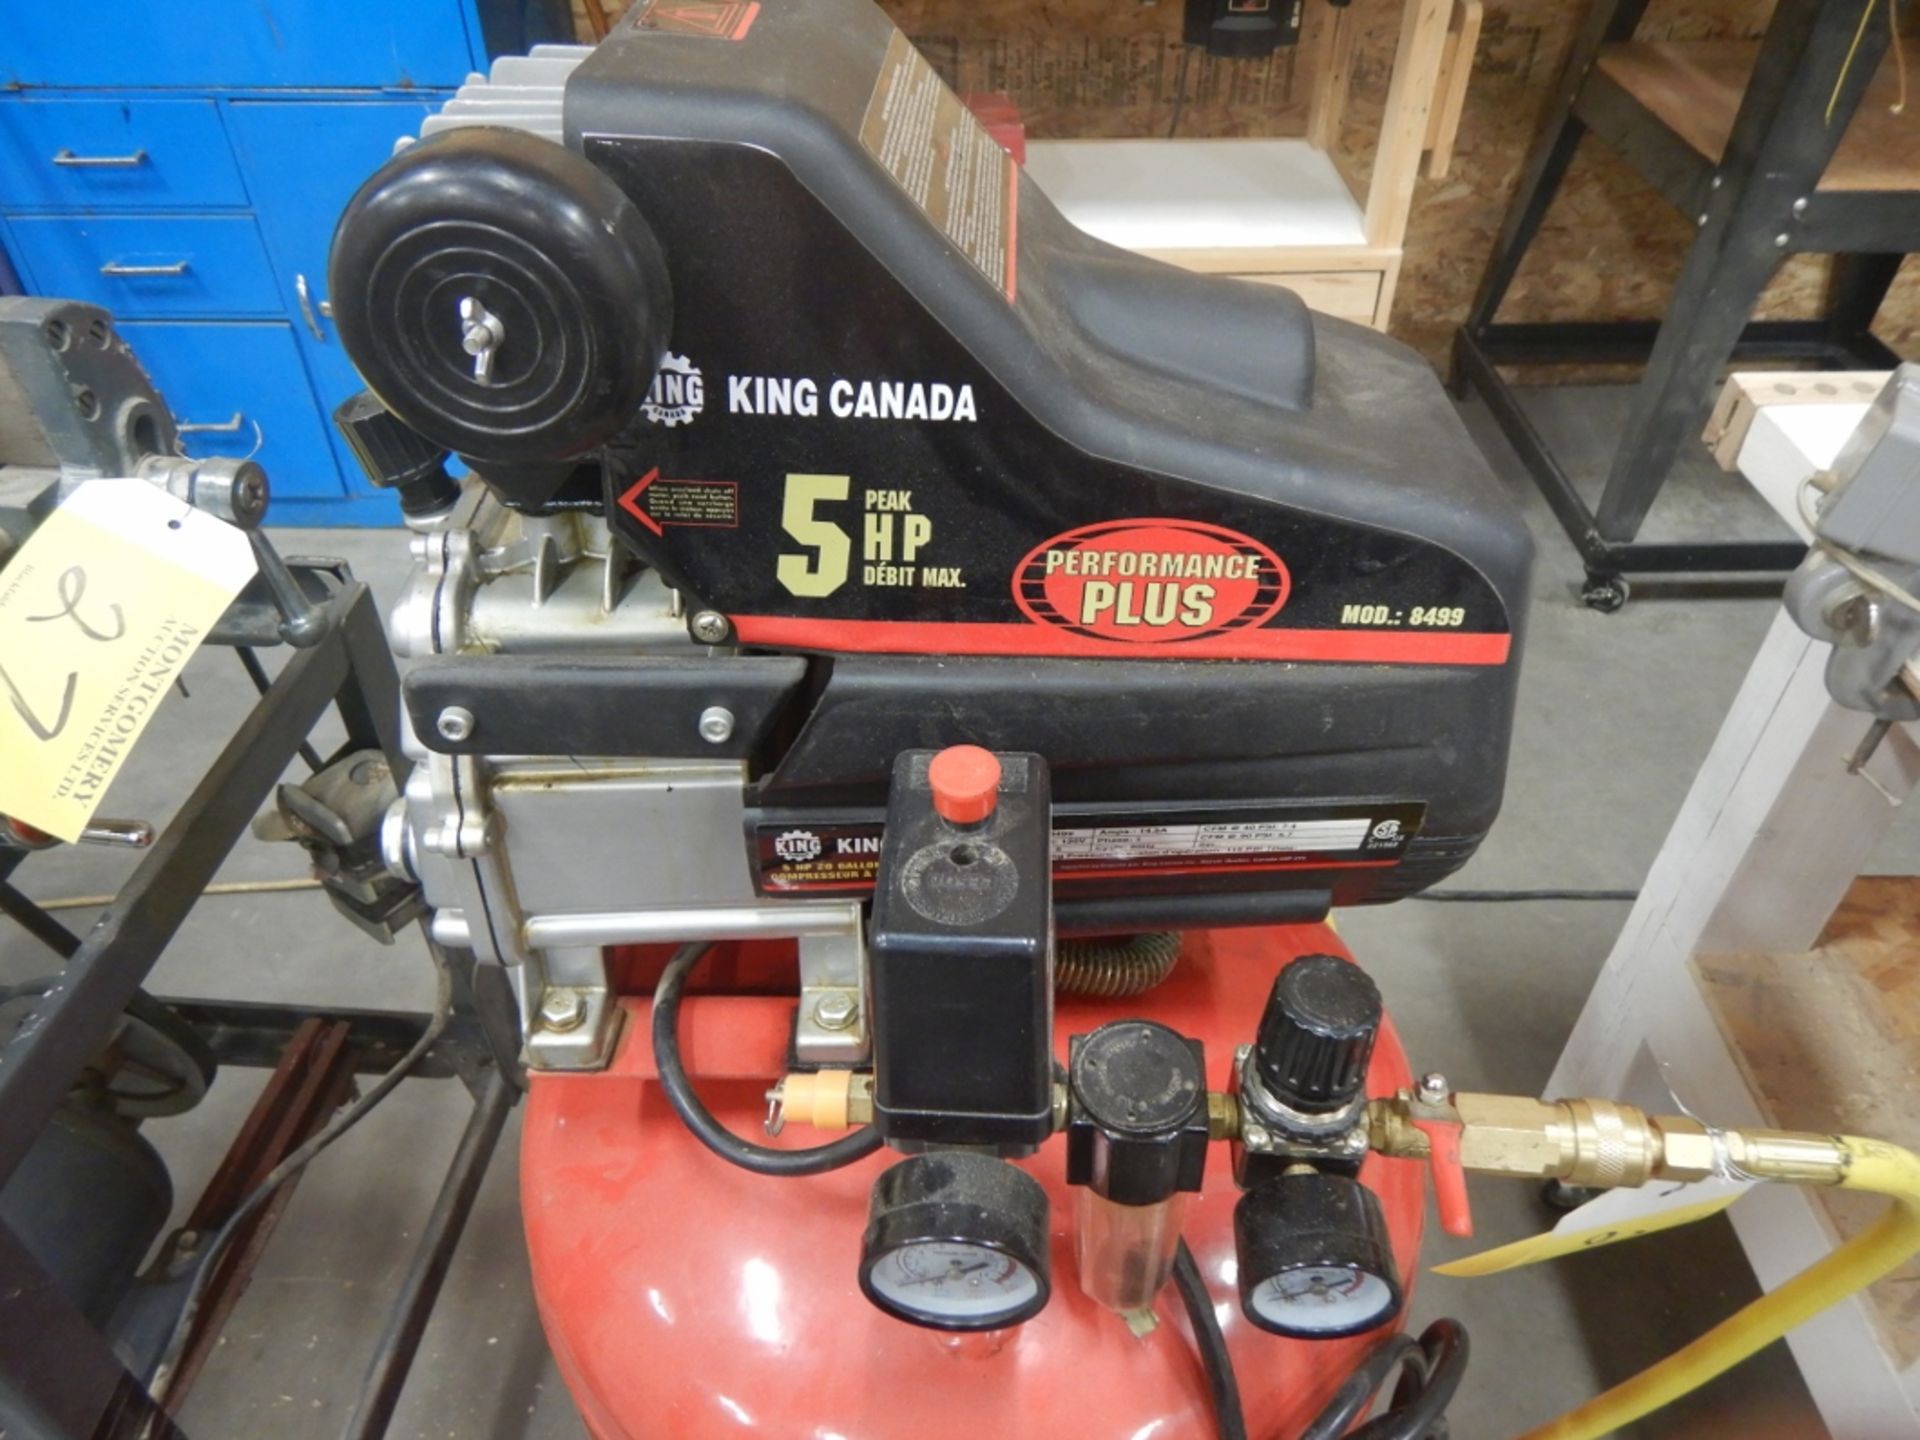 KING CANADA PERFORMANCE PLUS UPRIGHT 5HP AIR COMPRESSOR W/ HOSE - Image 3 of 8